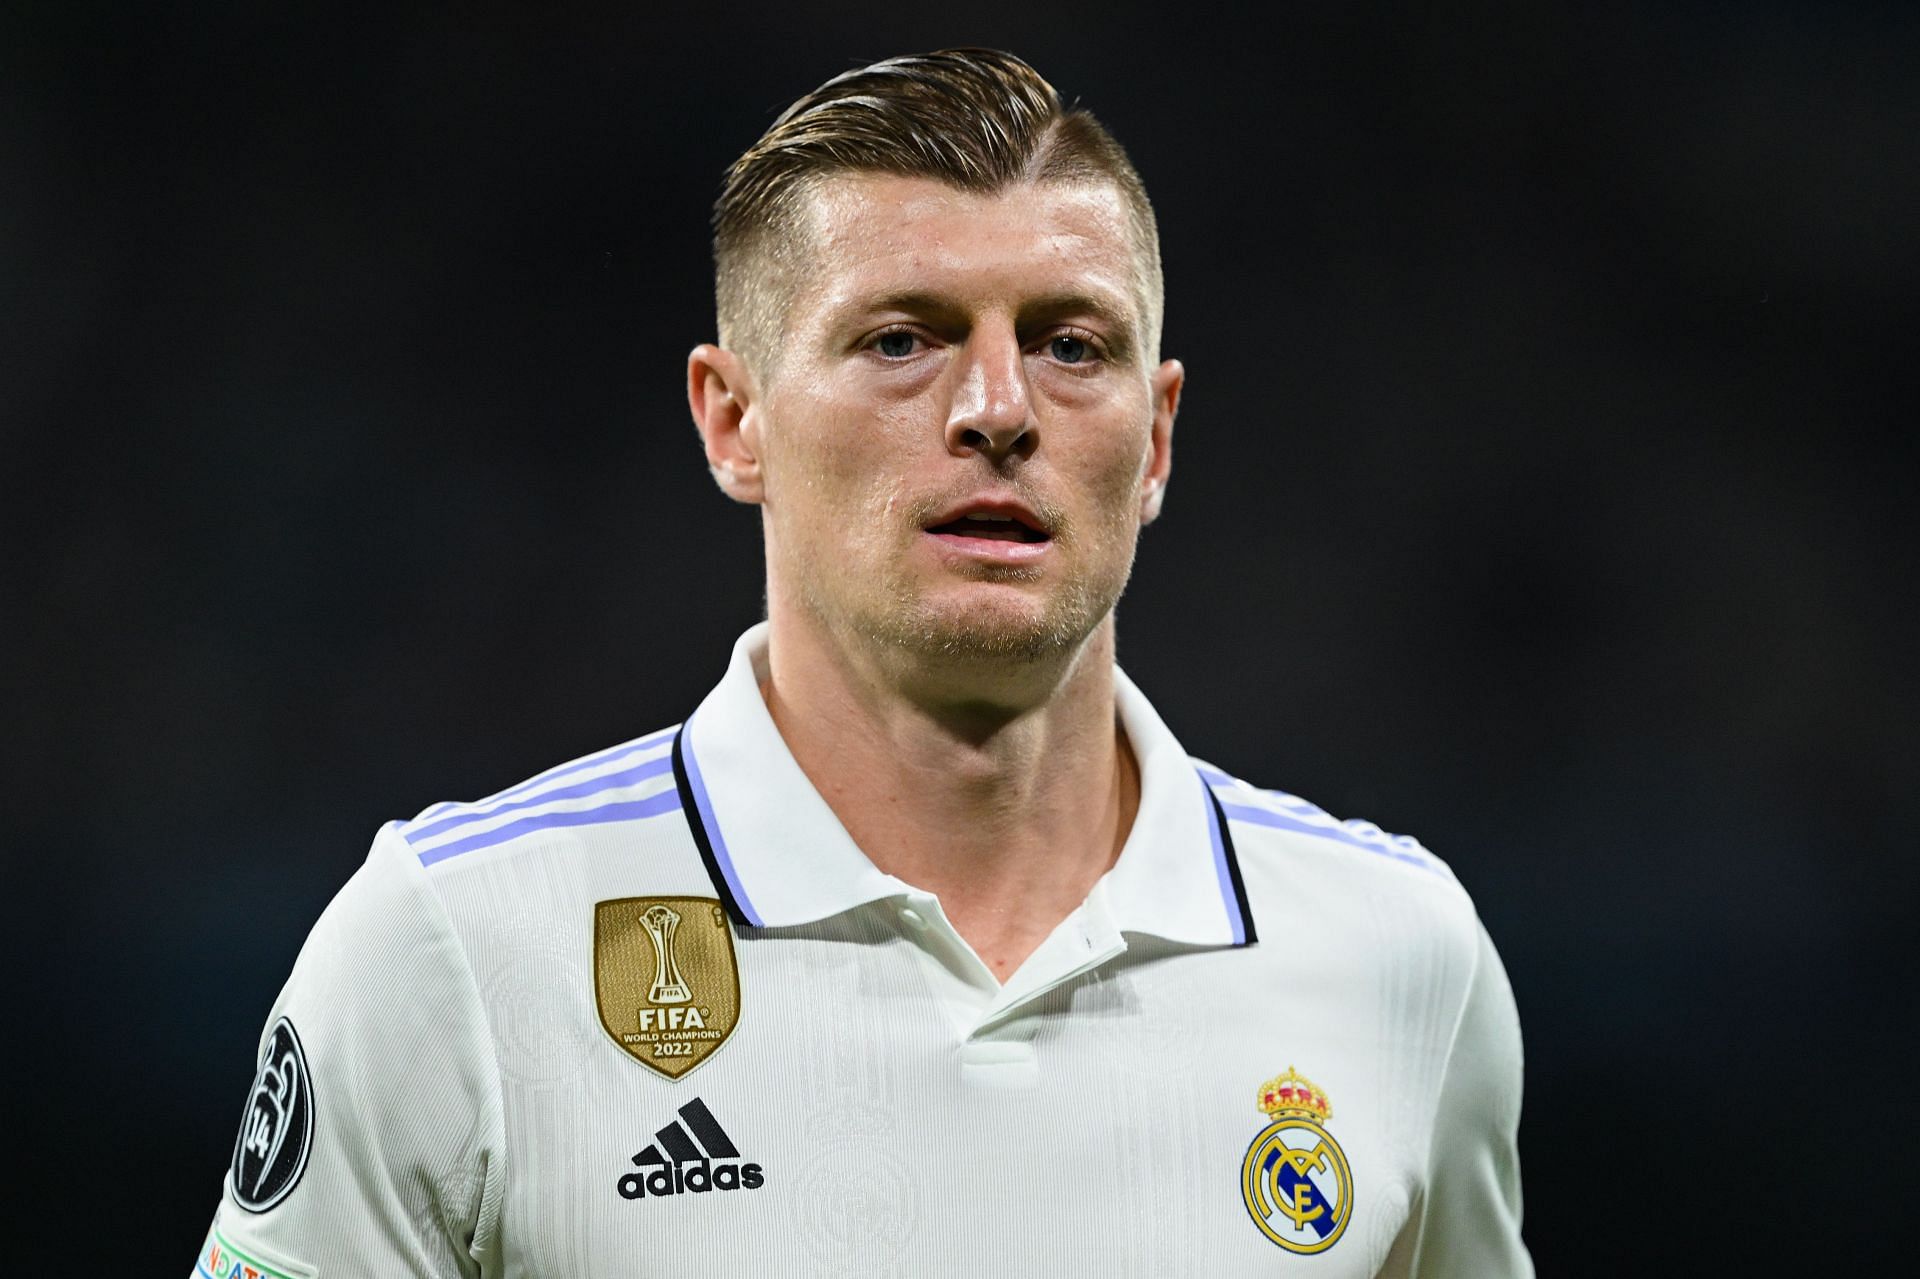 Toni Kroos has been linked with an exit from the Santiago Bernabeu recently.